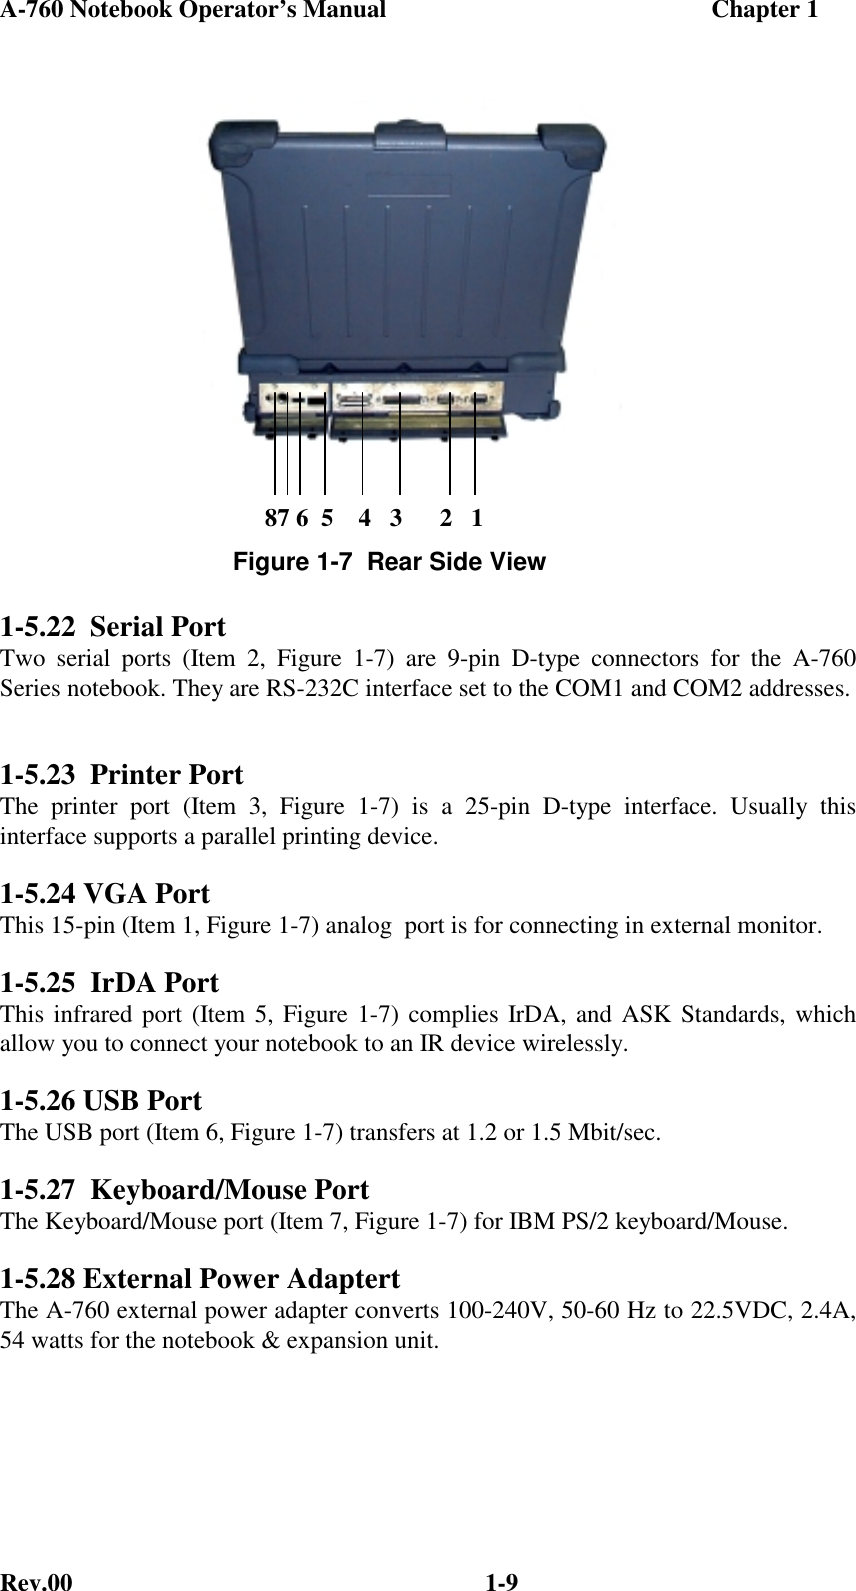 A-760 Notebook Operator’s Manual                                                    Chapter 1Rev.00 1-91-5.22  Serial PortTwo serial ports (Item 2, Figure 1-7) are 9-pin D-type connectors for the A-760Series notebook. They are RS-232C interface set to the COM1 and COM2 addresses.1-5.23  Printer PortThe printer port (Item 3, Figure 1-7) is a 25-pin D-type interface. Usually thisinterface supports a parallel printing device.1-5.24 VGA PortThis 15-pin (Item 1, Figure 1-7) analog  port is for connecting in external monitor.1-5.25  IrDA PortThis infrared port (Item 5, Figure 1-7) complies IrDA, and ASK Standards, whichallow you to connect your notebook to an IR device wirelessly.1-5.26 USB PortThe USB port (Item 6, Figure 1-7) transfers at 1.2 or 1.5 Mbit/sec.1-5.27  Keyboard/Mouse PortThe Keyboard/Mouse port (Item 7, Figure 1-7) for IBM PS/2 keyboard/Mouse.1-5.28 External Power AdaptertThe A-760 external power adapter converts 100-240V, 50-60 Hz to 22.5VDC, 2.4A,54 watts for the notebook &amp; expansion unit.Figure 1-7  Rear Side View      87 6  5    4   3      2   1